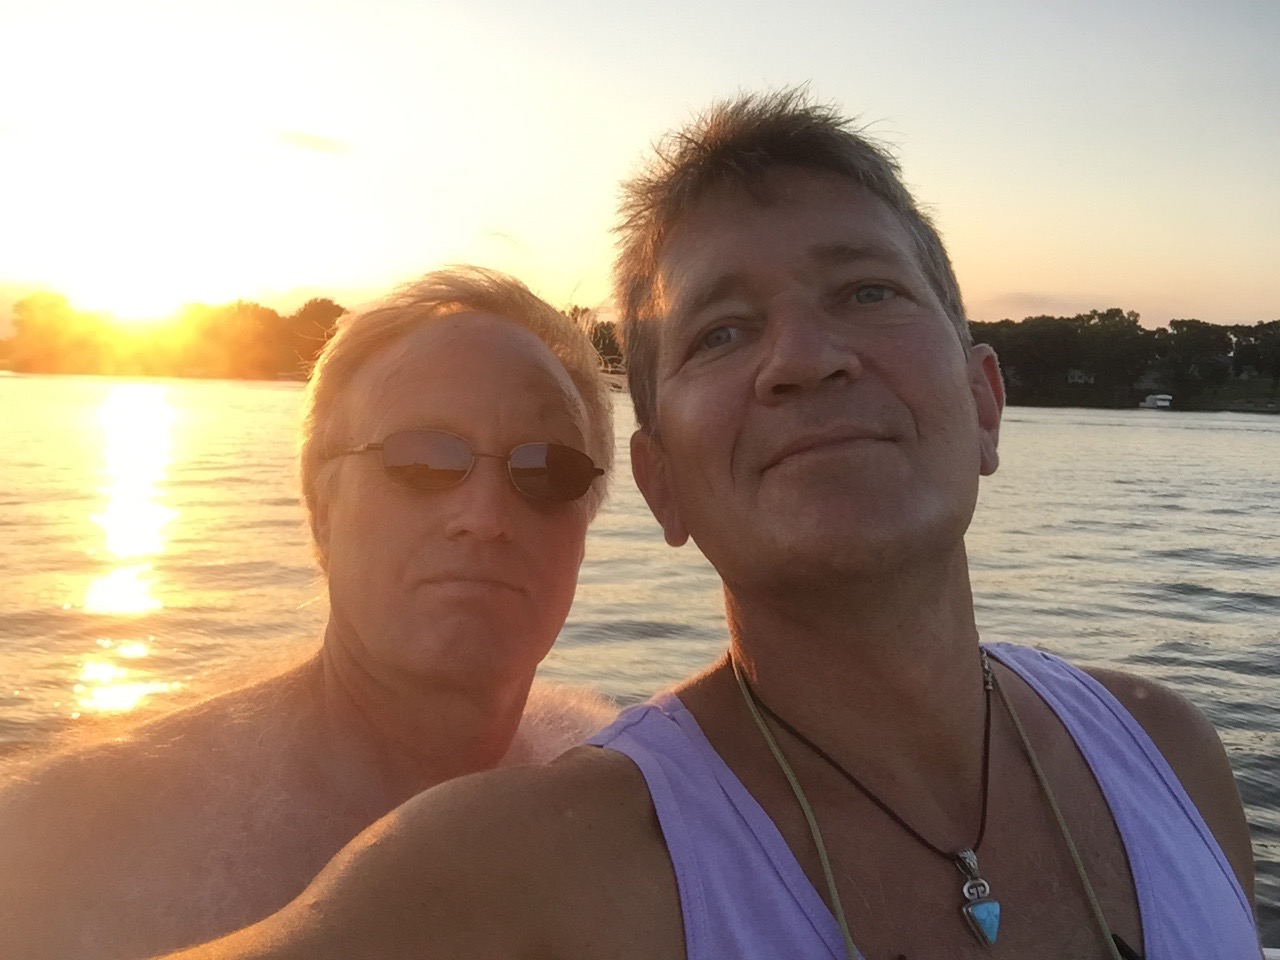 Meet Scott, proudly representing my so many friends. Scott’s a BFF since 2nd grade, growing up in Soo Siddy and beyond, who spent the last few days prepping (and partying) with me at home on Lake Owasso. In this pic, we are afloat at Boji just a few weeks ago.